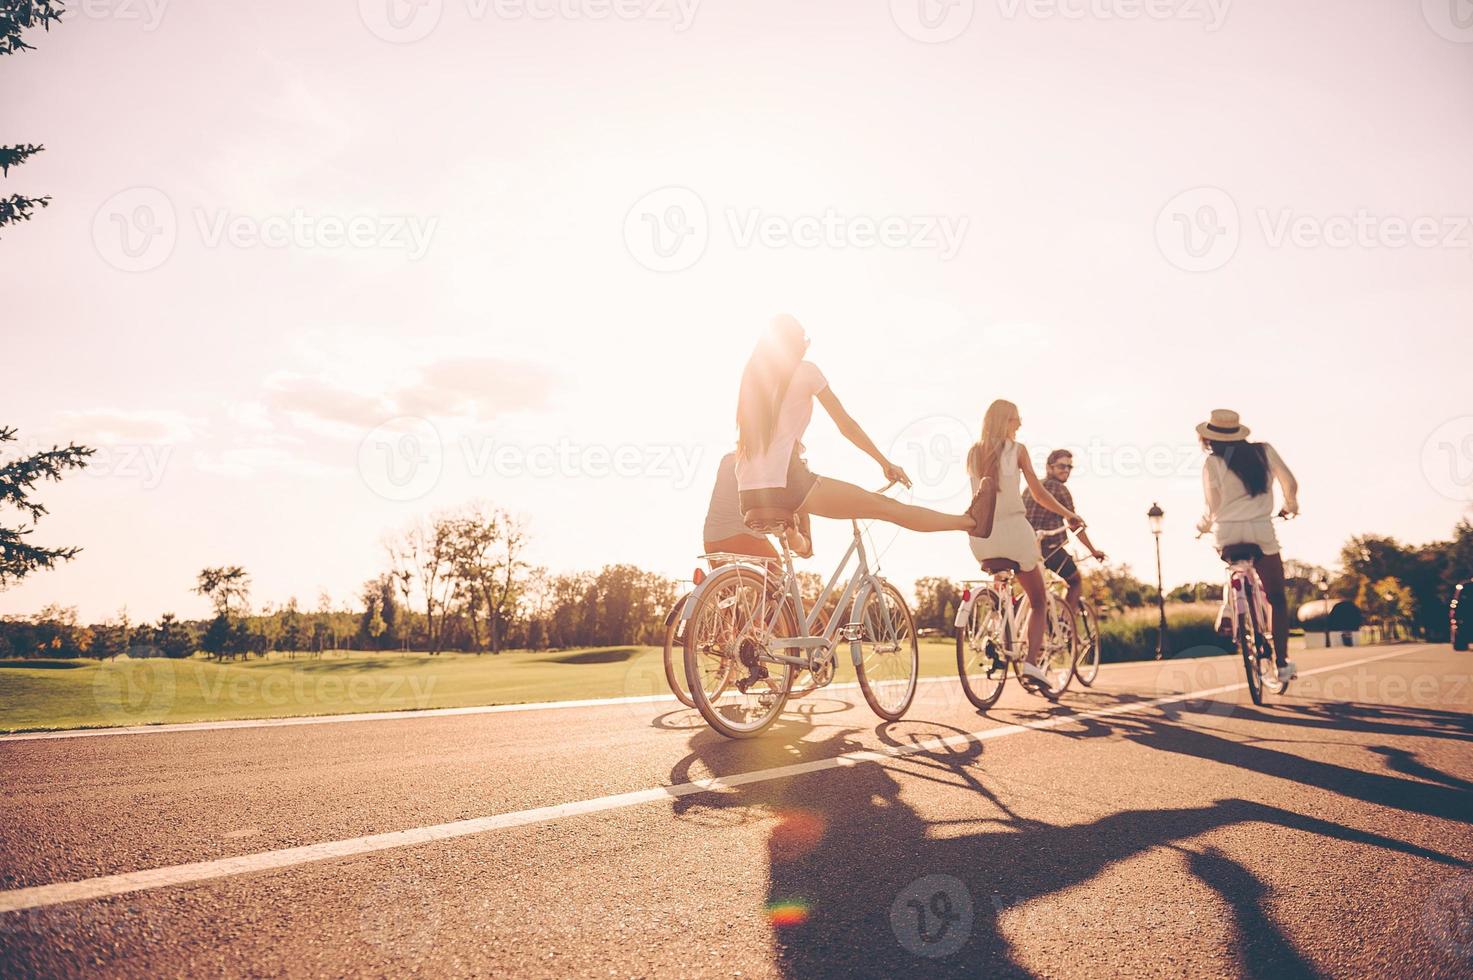 Enjoying nice summer day together. Low angle view of young people riding bicycles along a road and looking happy photo